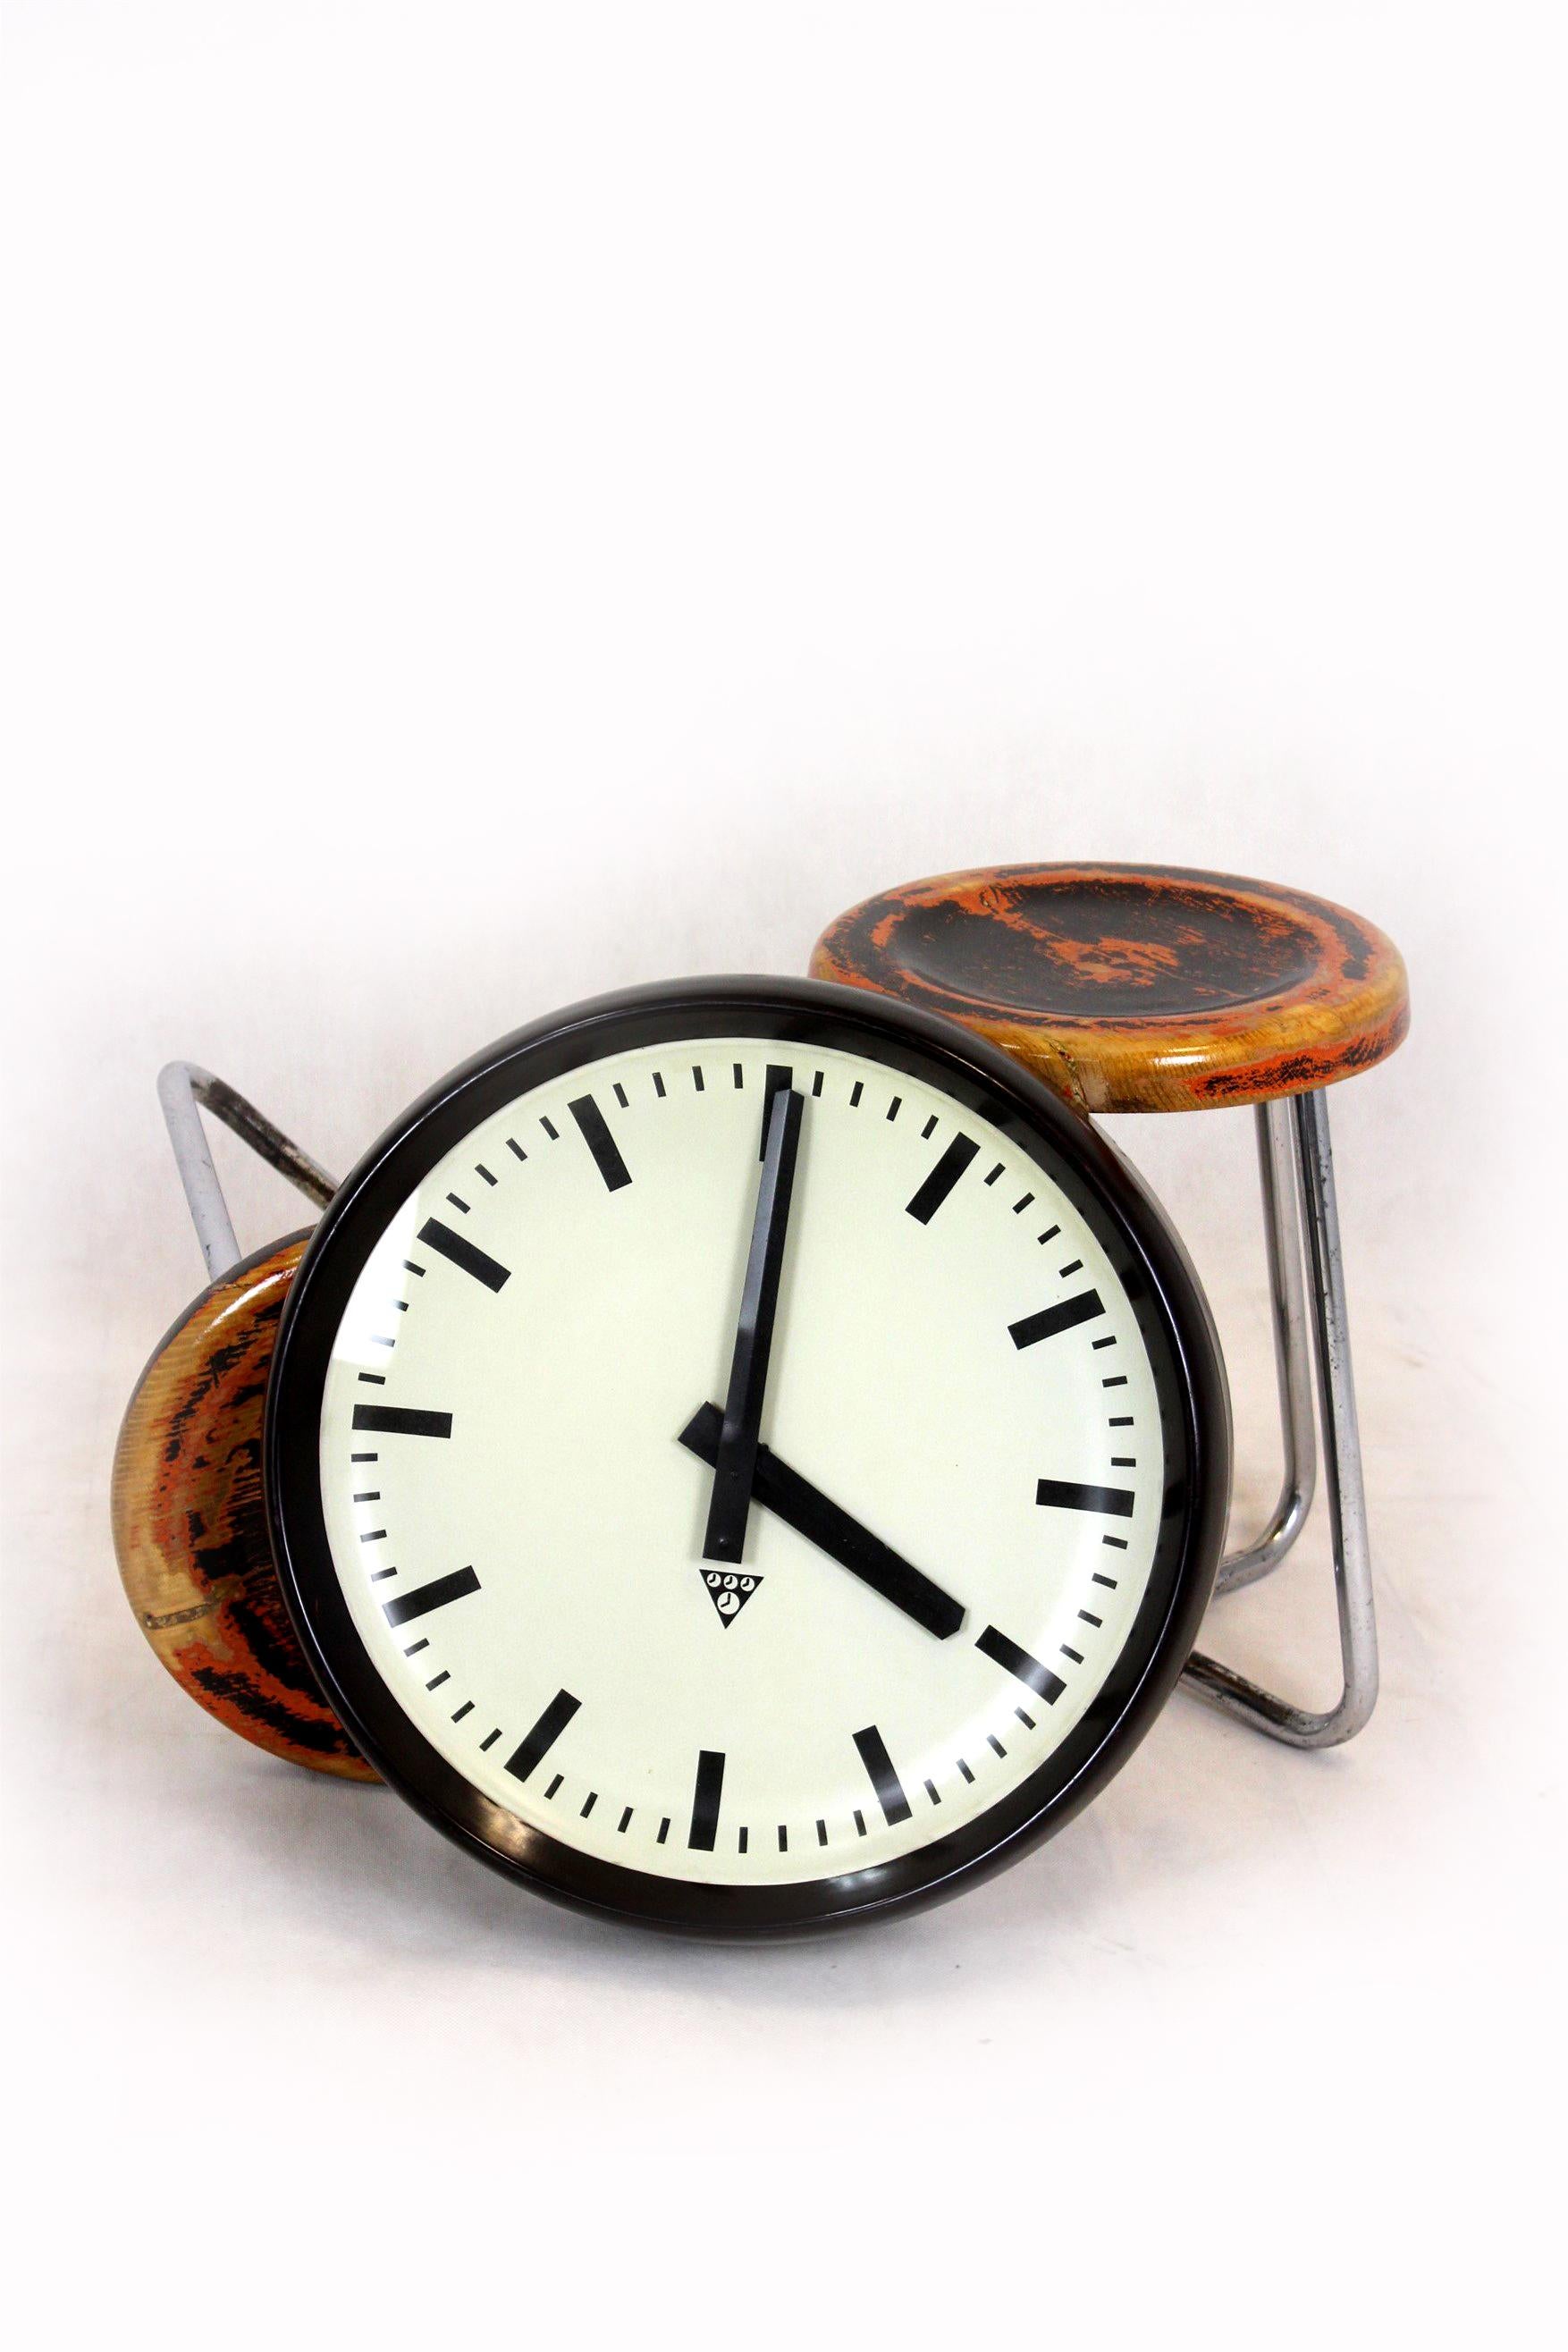 Large (50cm) bakelite railway clock manufactured by Pragotron in the 1950s. Preserved in original good condition (a small crack, shown in the photo), fully functional. It has been converted into a quartz controller (it works on an AA battery), so it